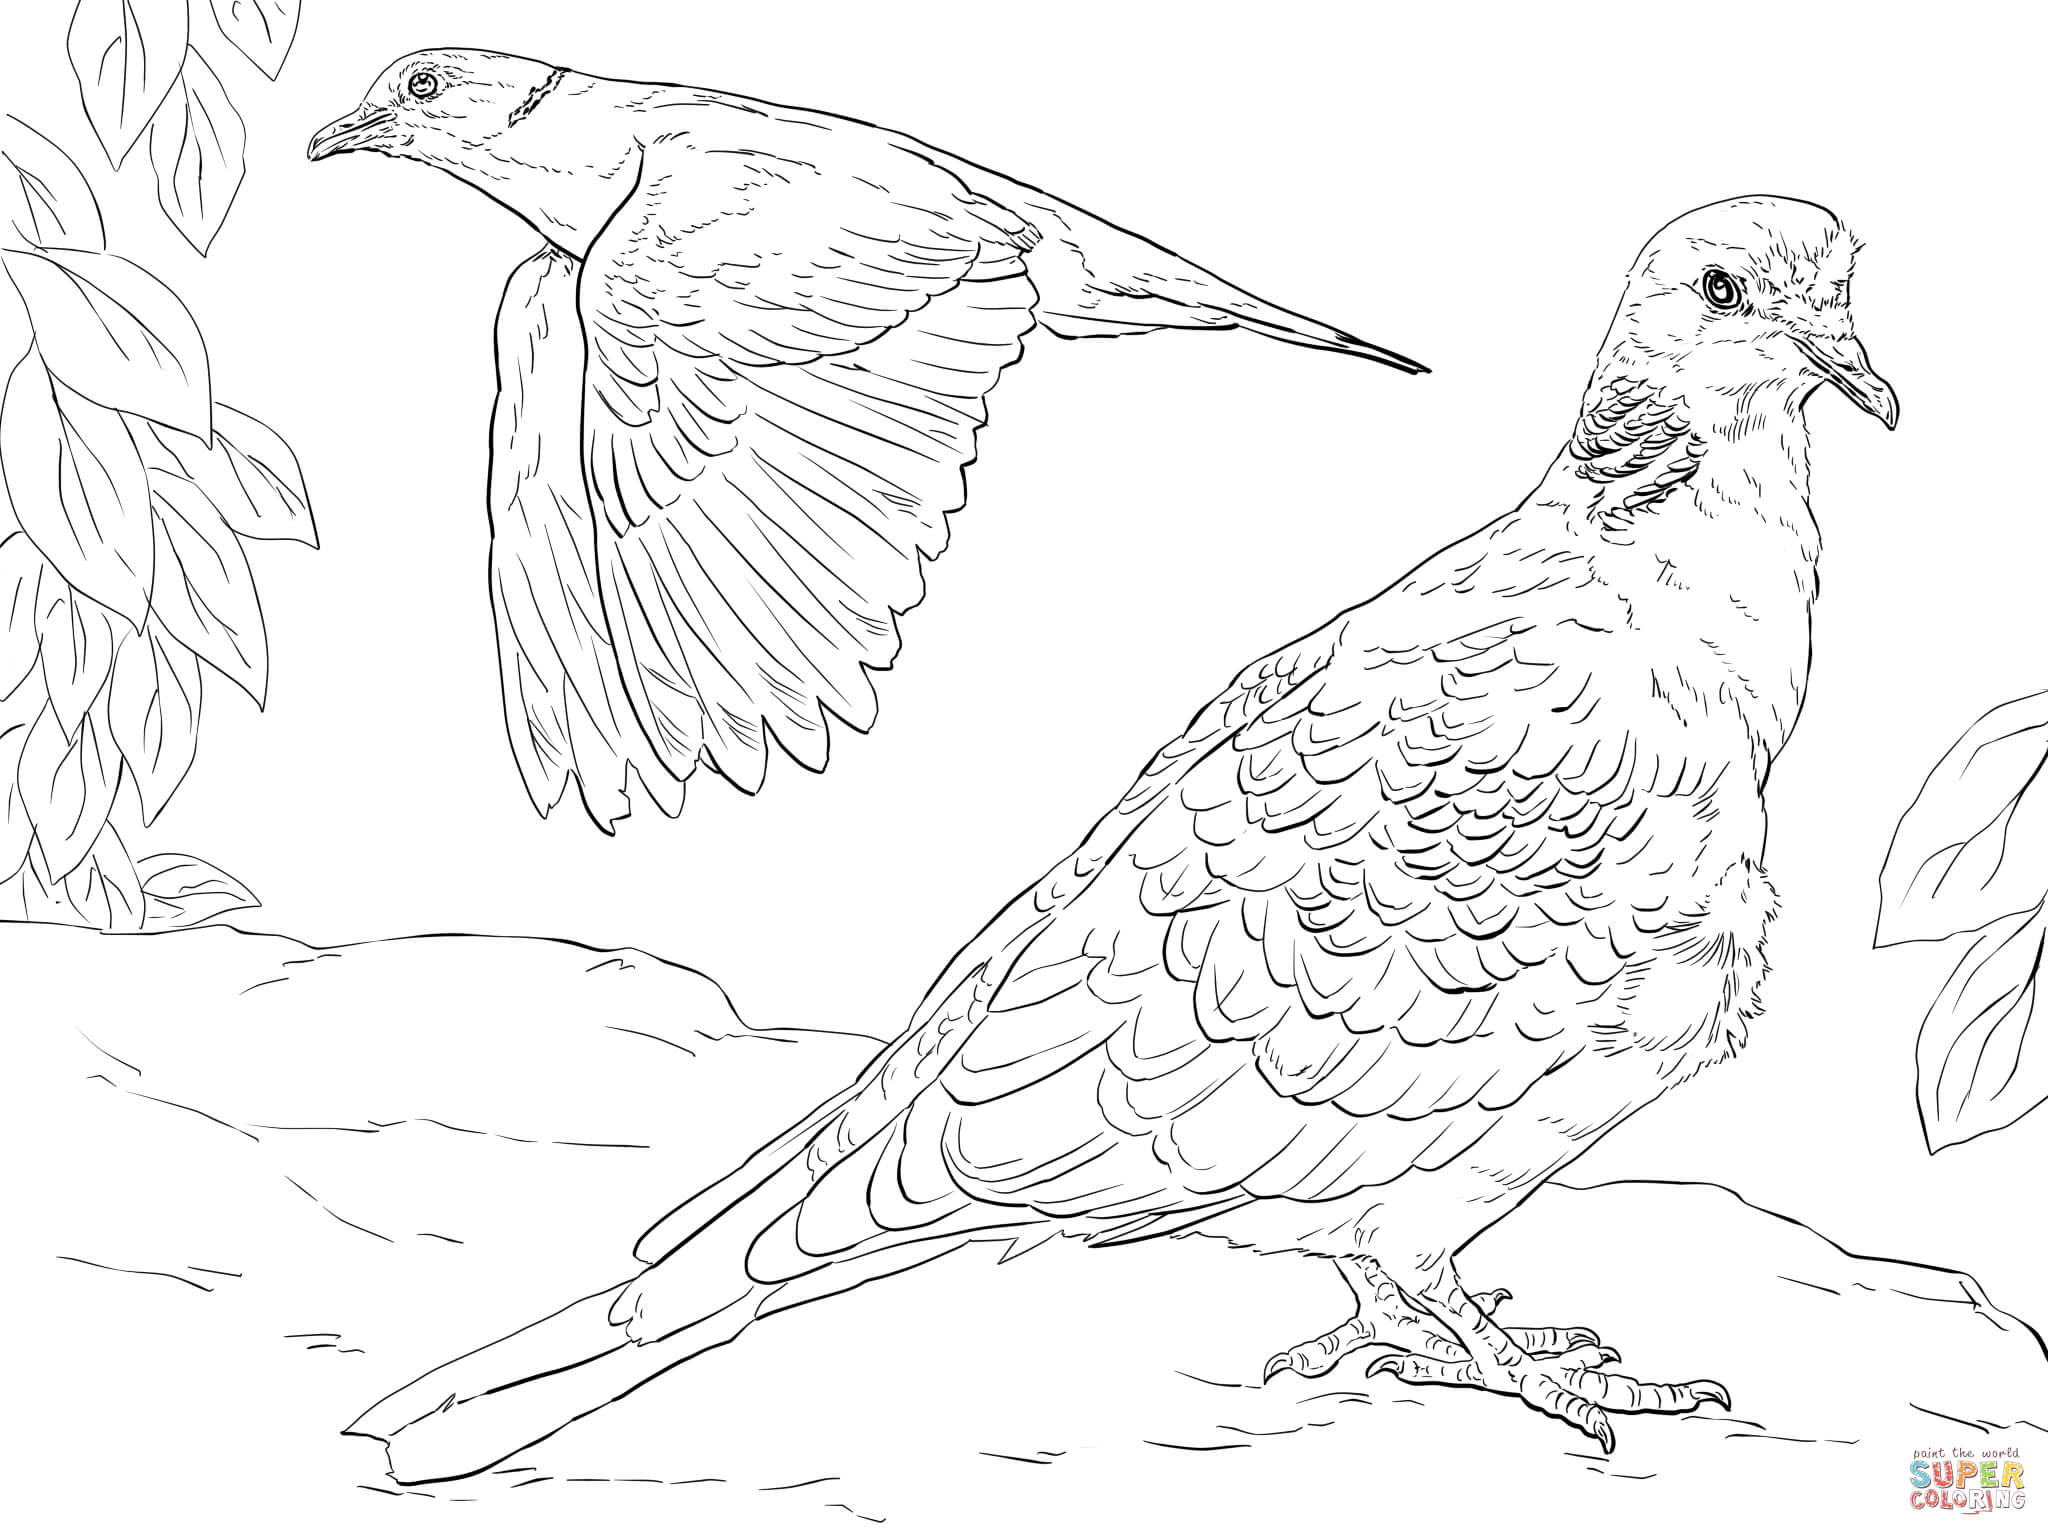 Turtle Doves coloring page | Free Printable Coloring Pages